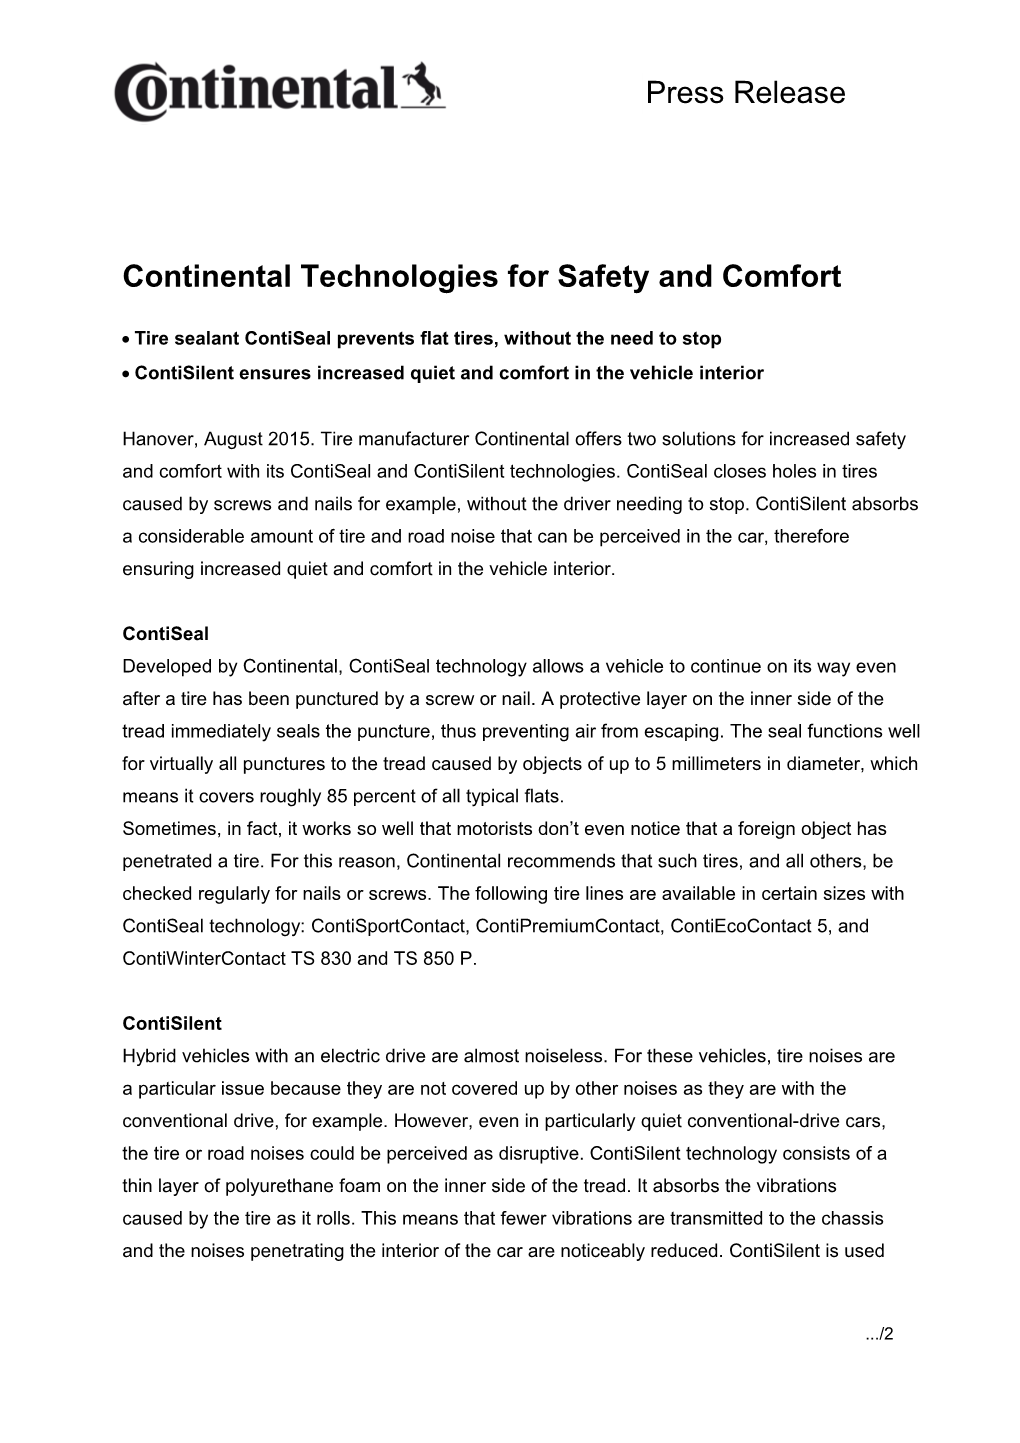 Continental Technologies for Safety and Comfort